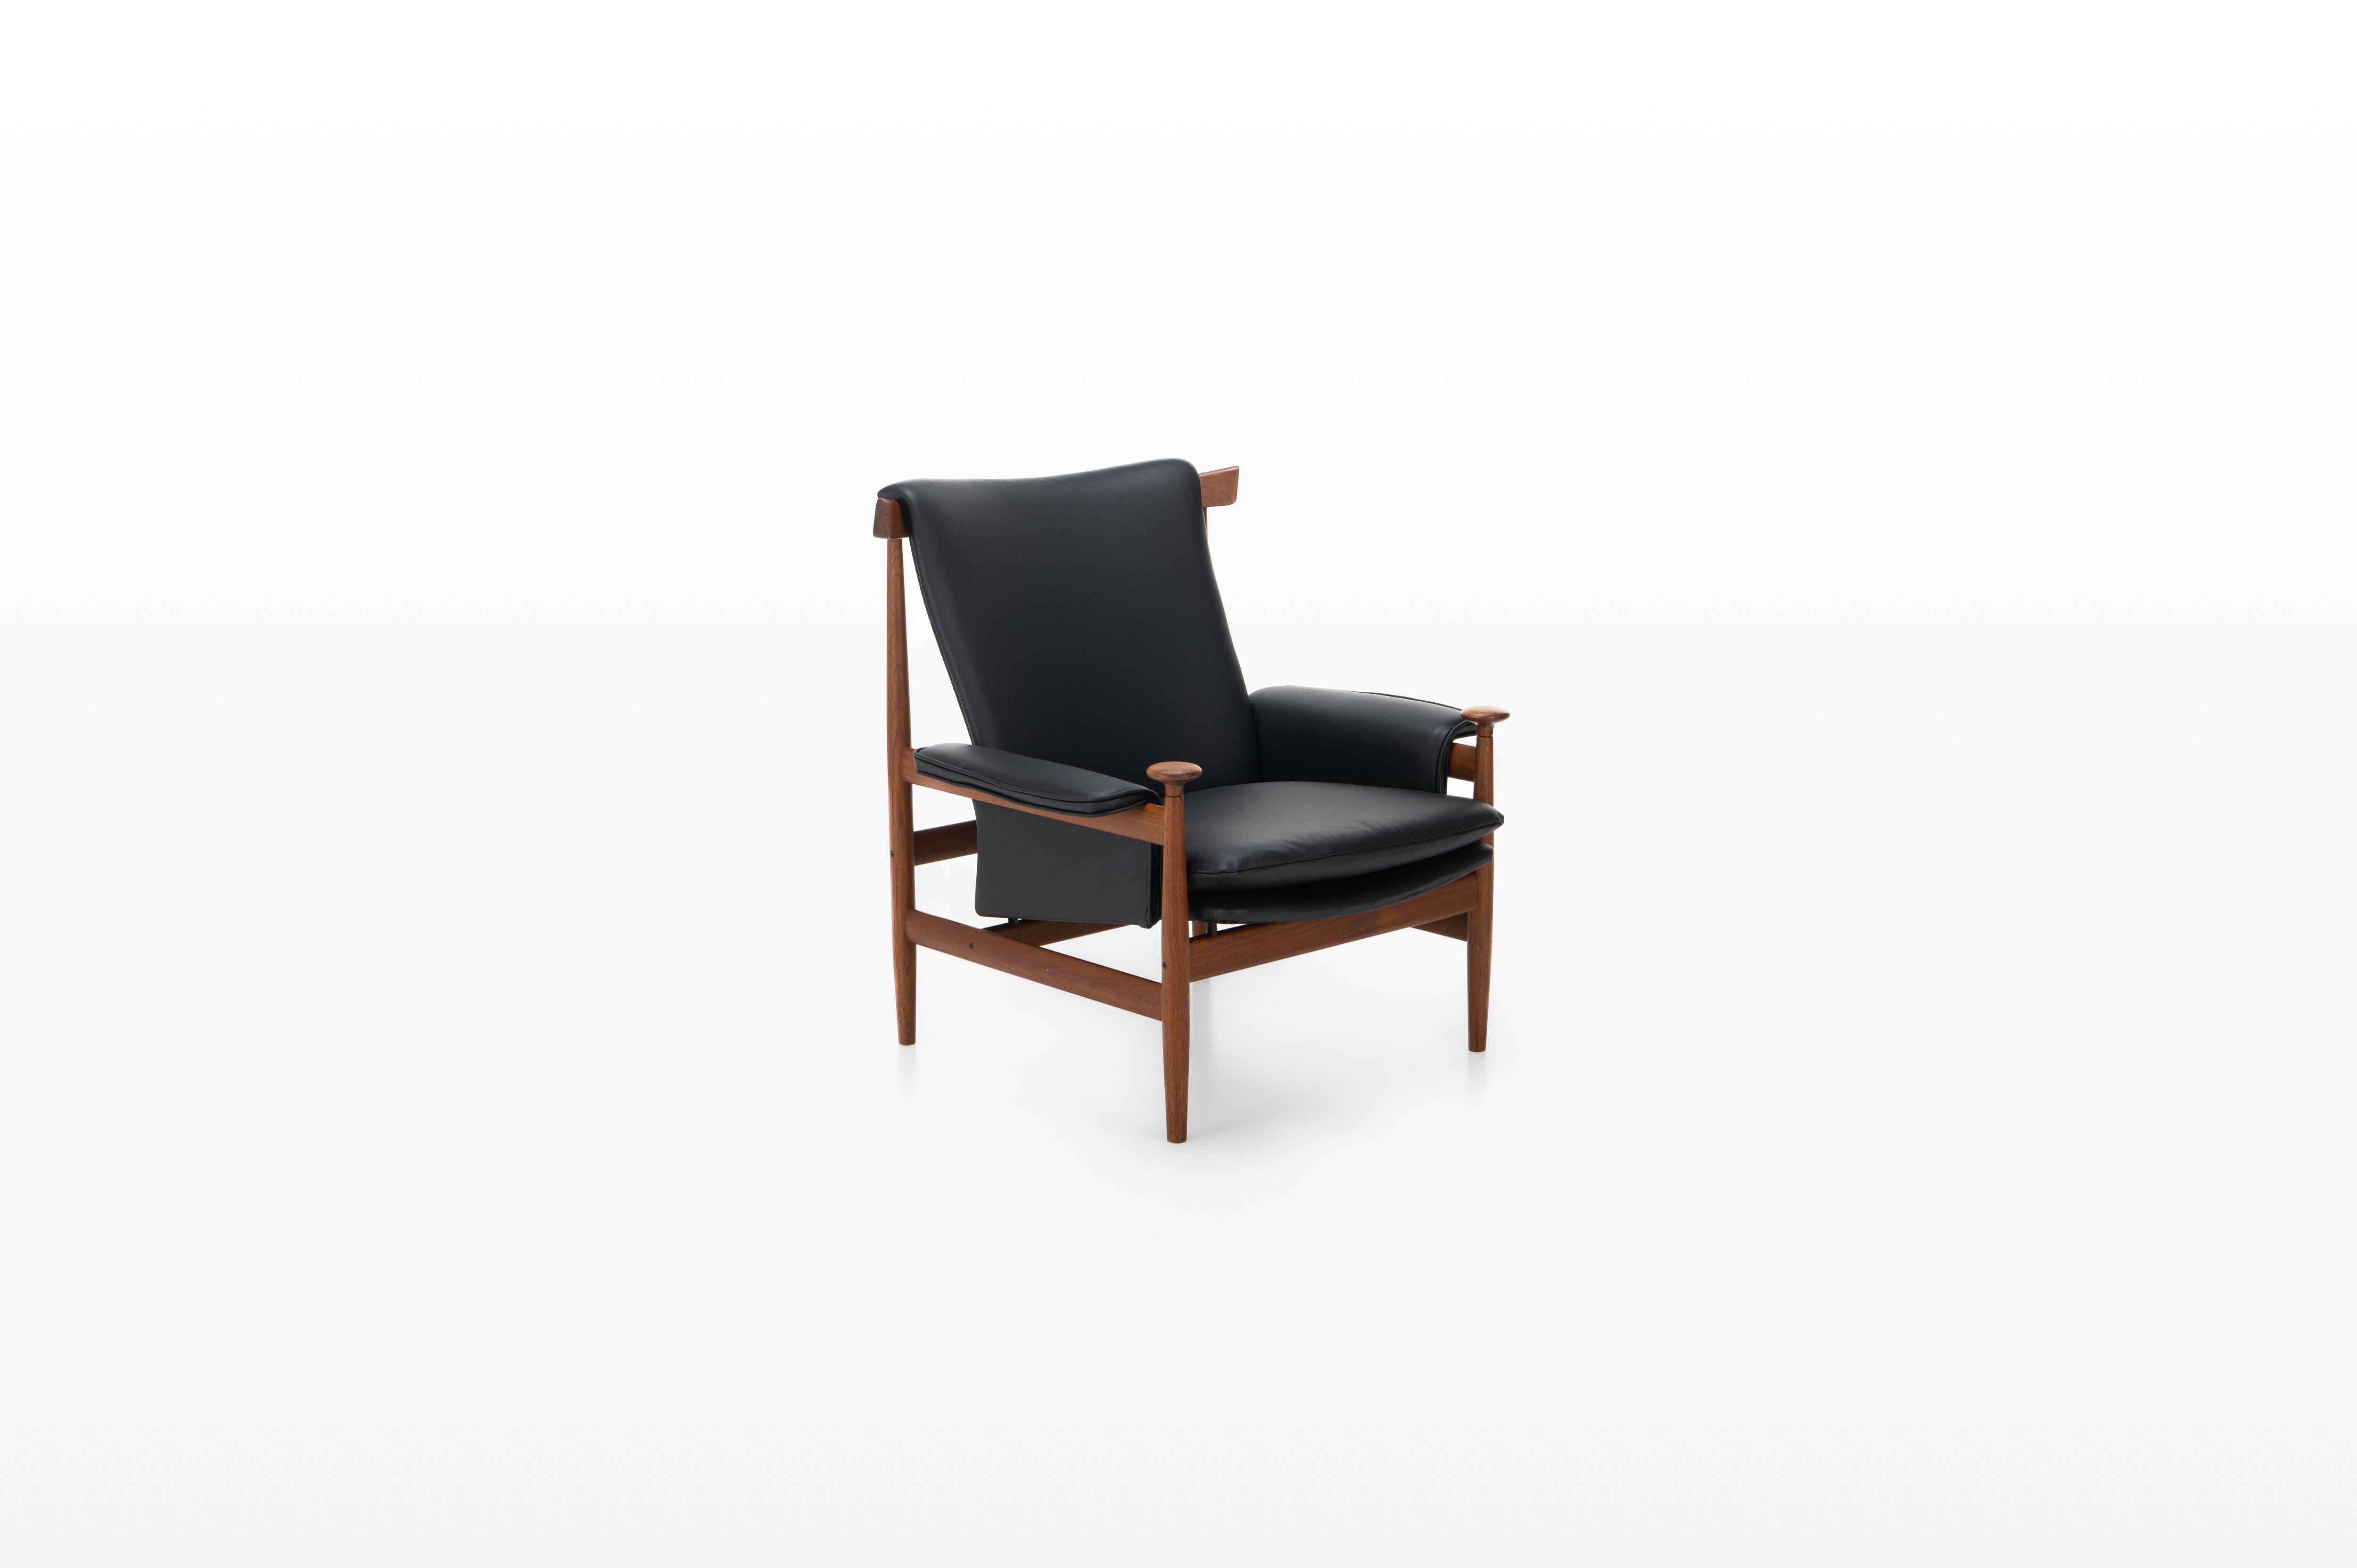 Beautiful Danish lounge chair designed by Finn Juhl. The Bwana chair was designed in 1962 by Finn Juhl for France & Son. This easy chair has been completely restored and re-upholstered in black leather.